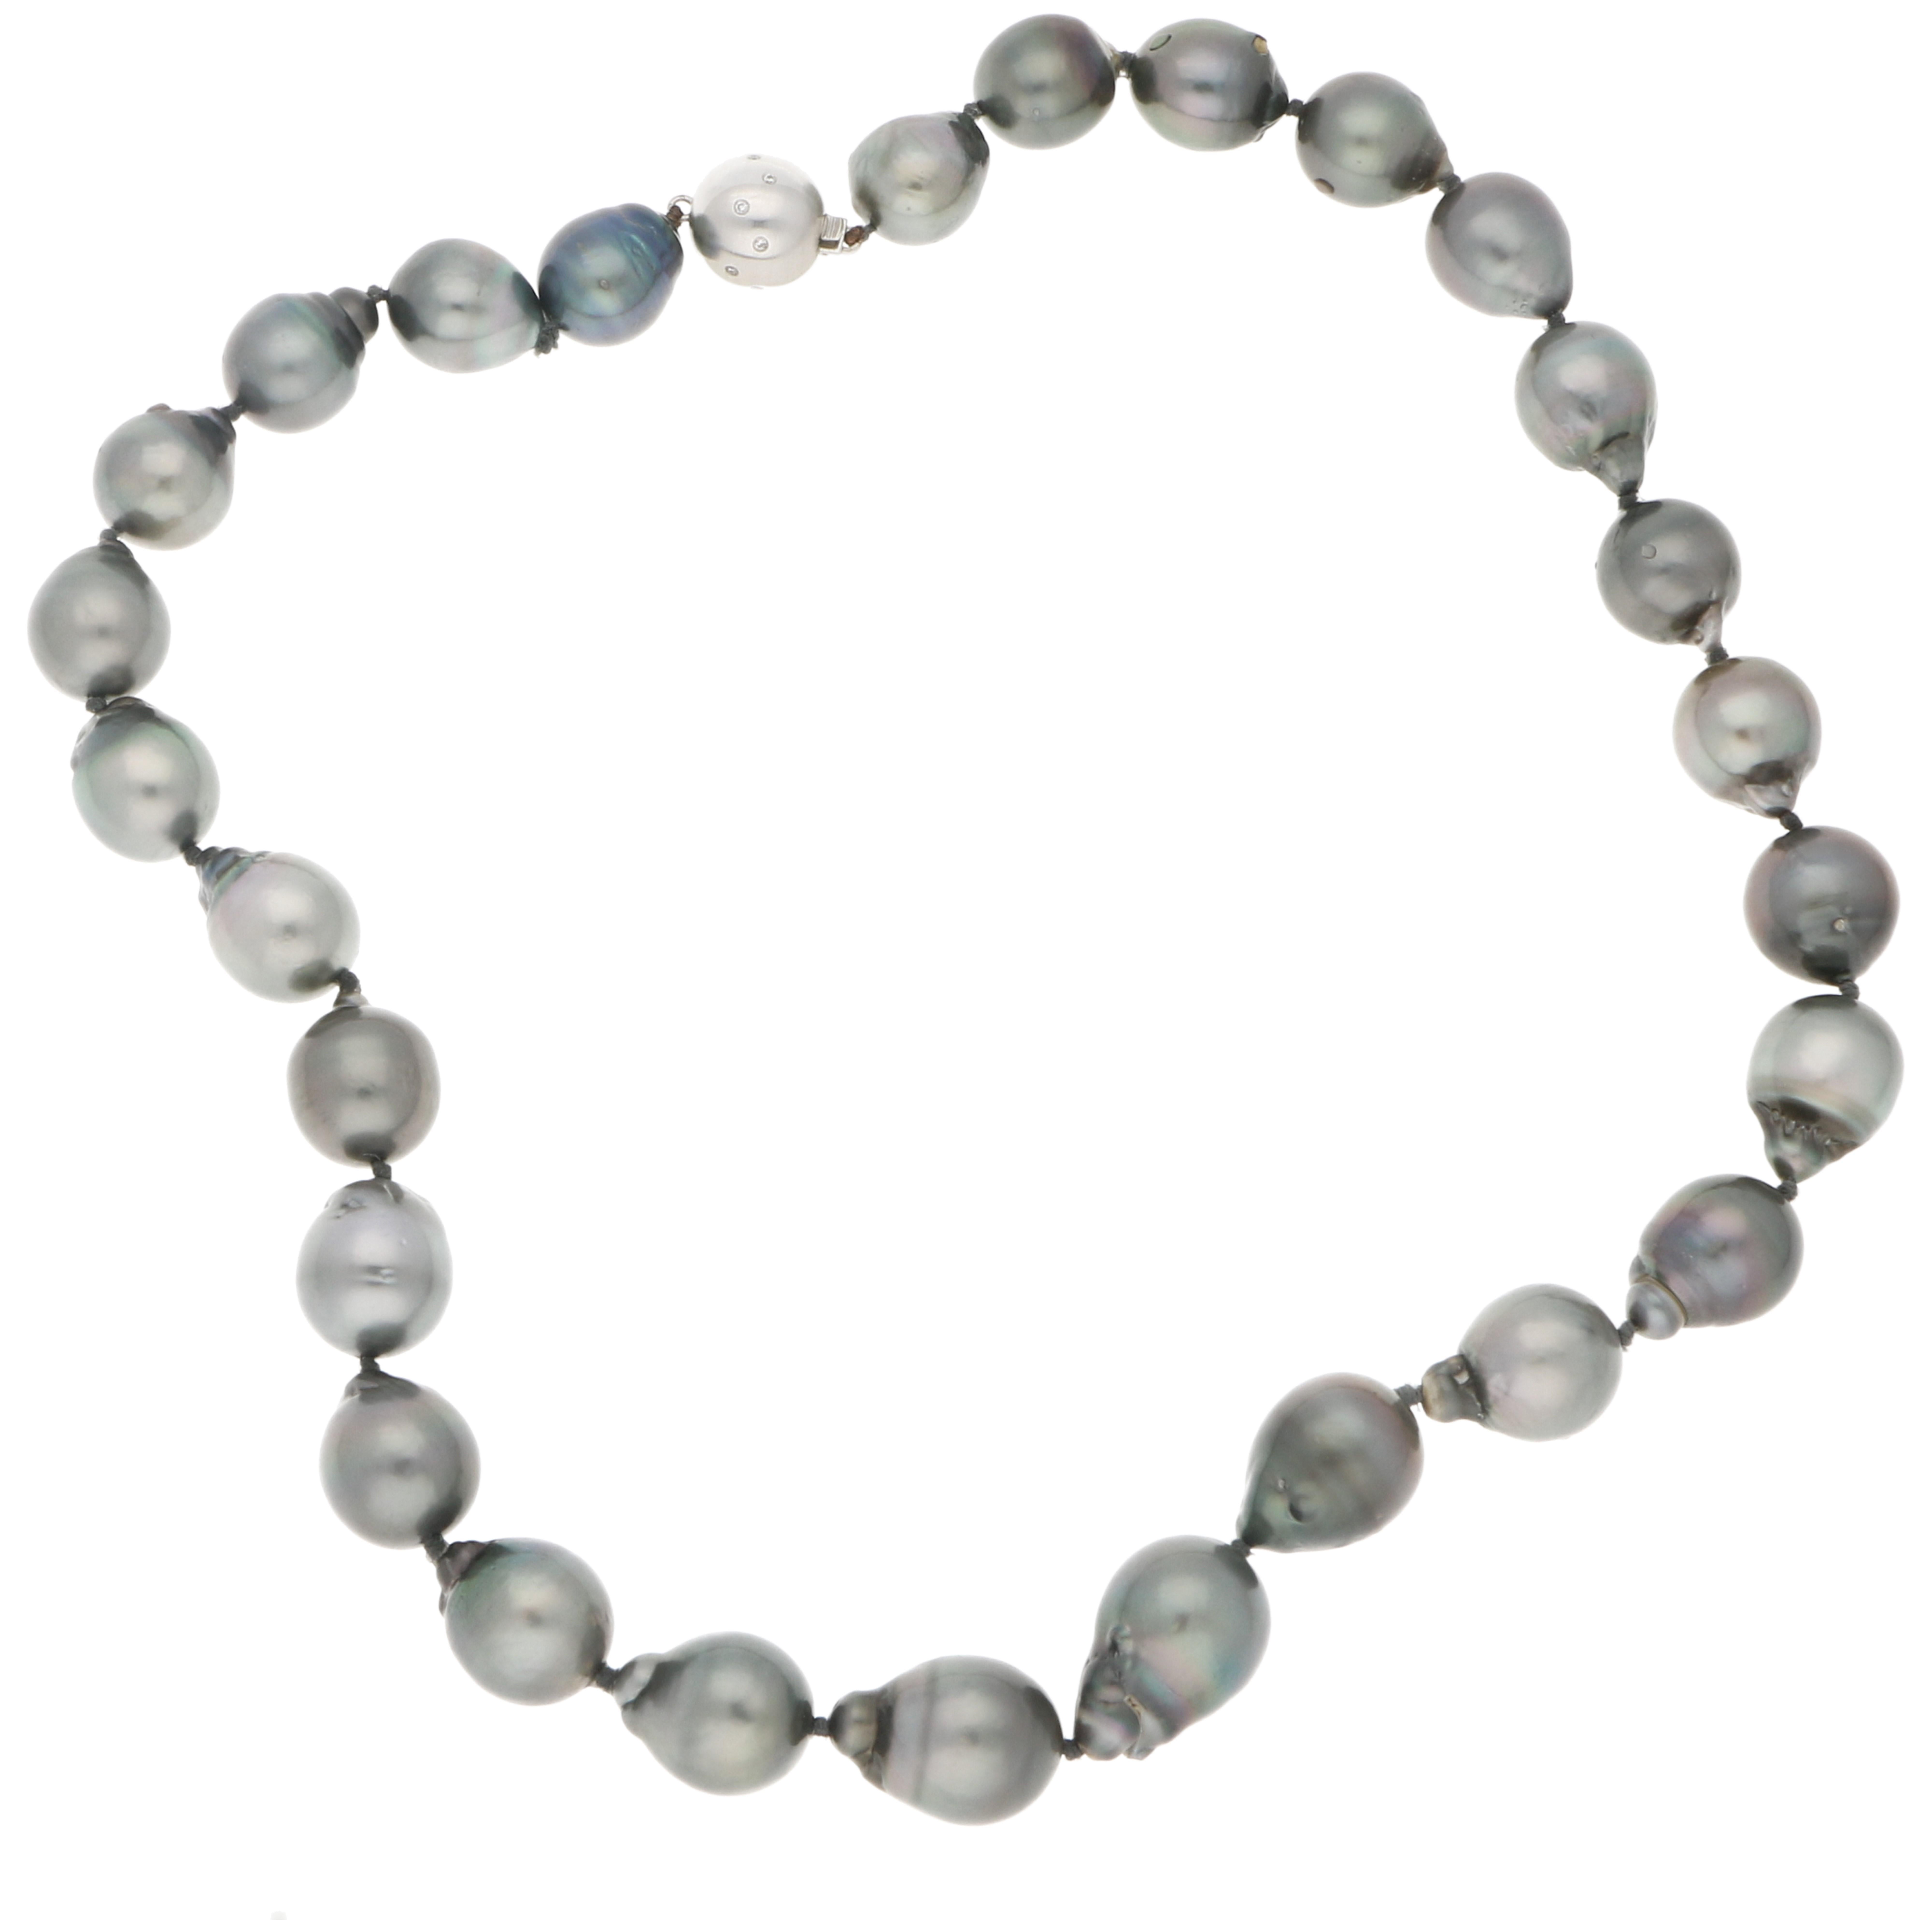 Modern Tahitian Pearl Strand Necklace with 18k White Gold Diamond Clasp